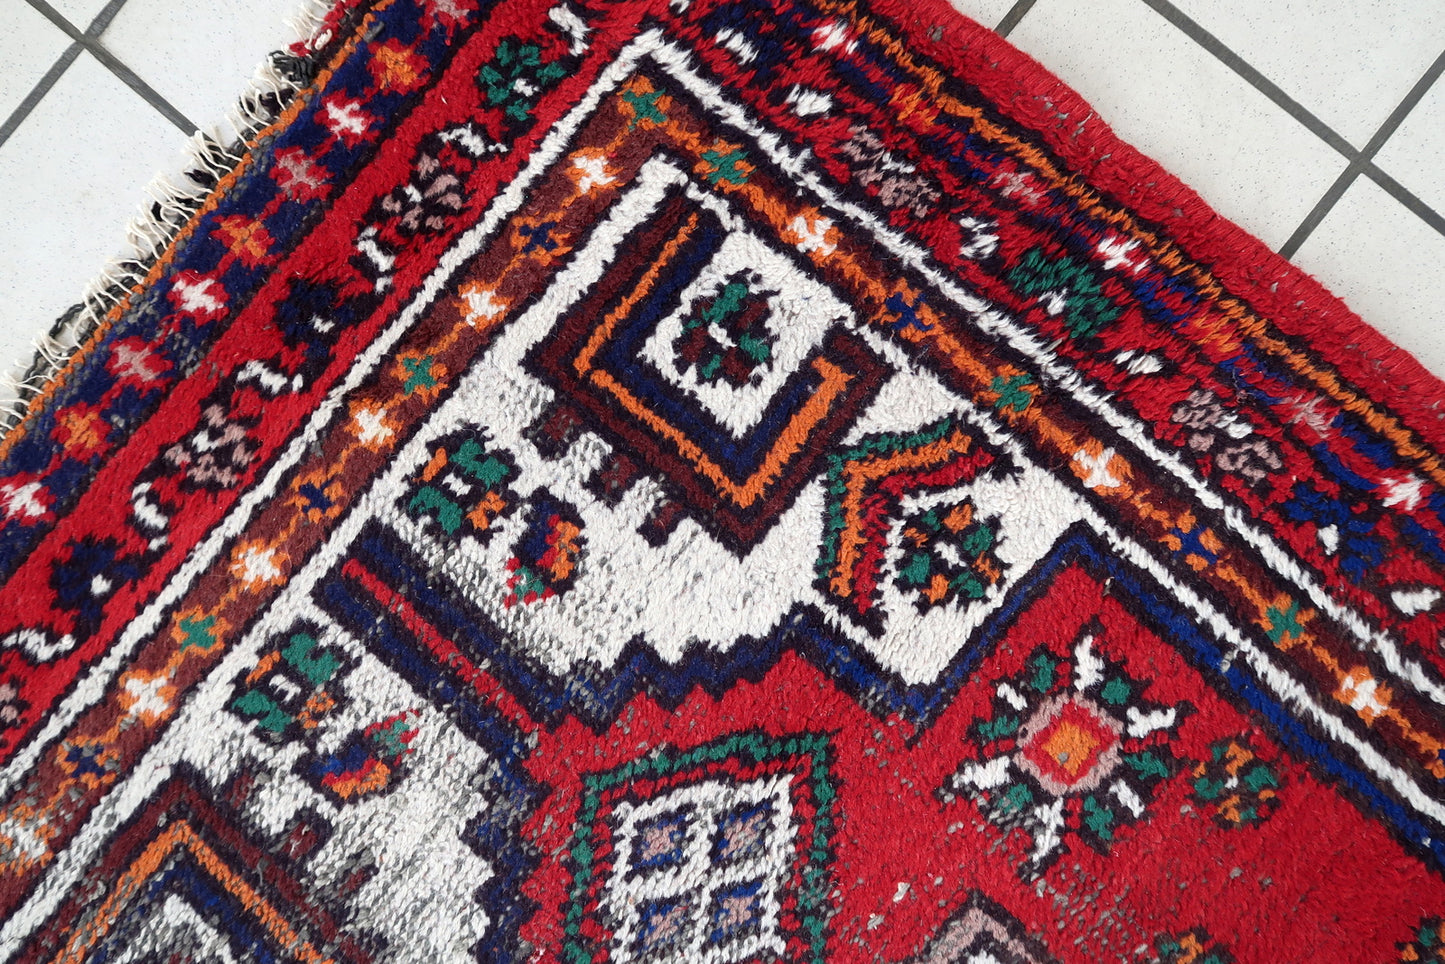 Handmade vintage Persian Hamadan rug in bright colors. The rug is from the end of 20th century in distressed condition.